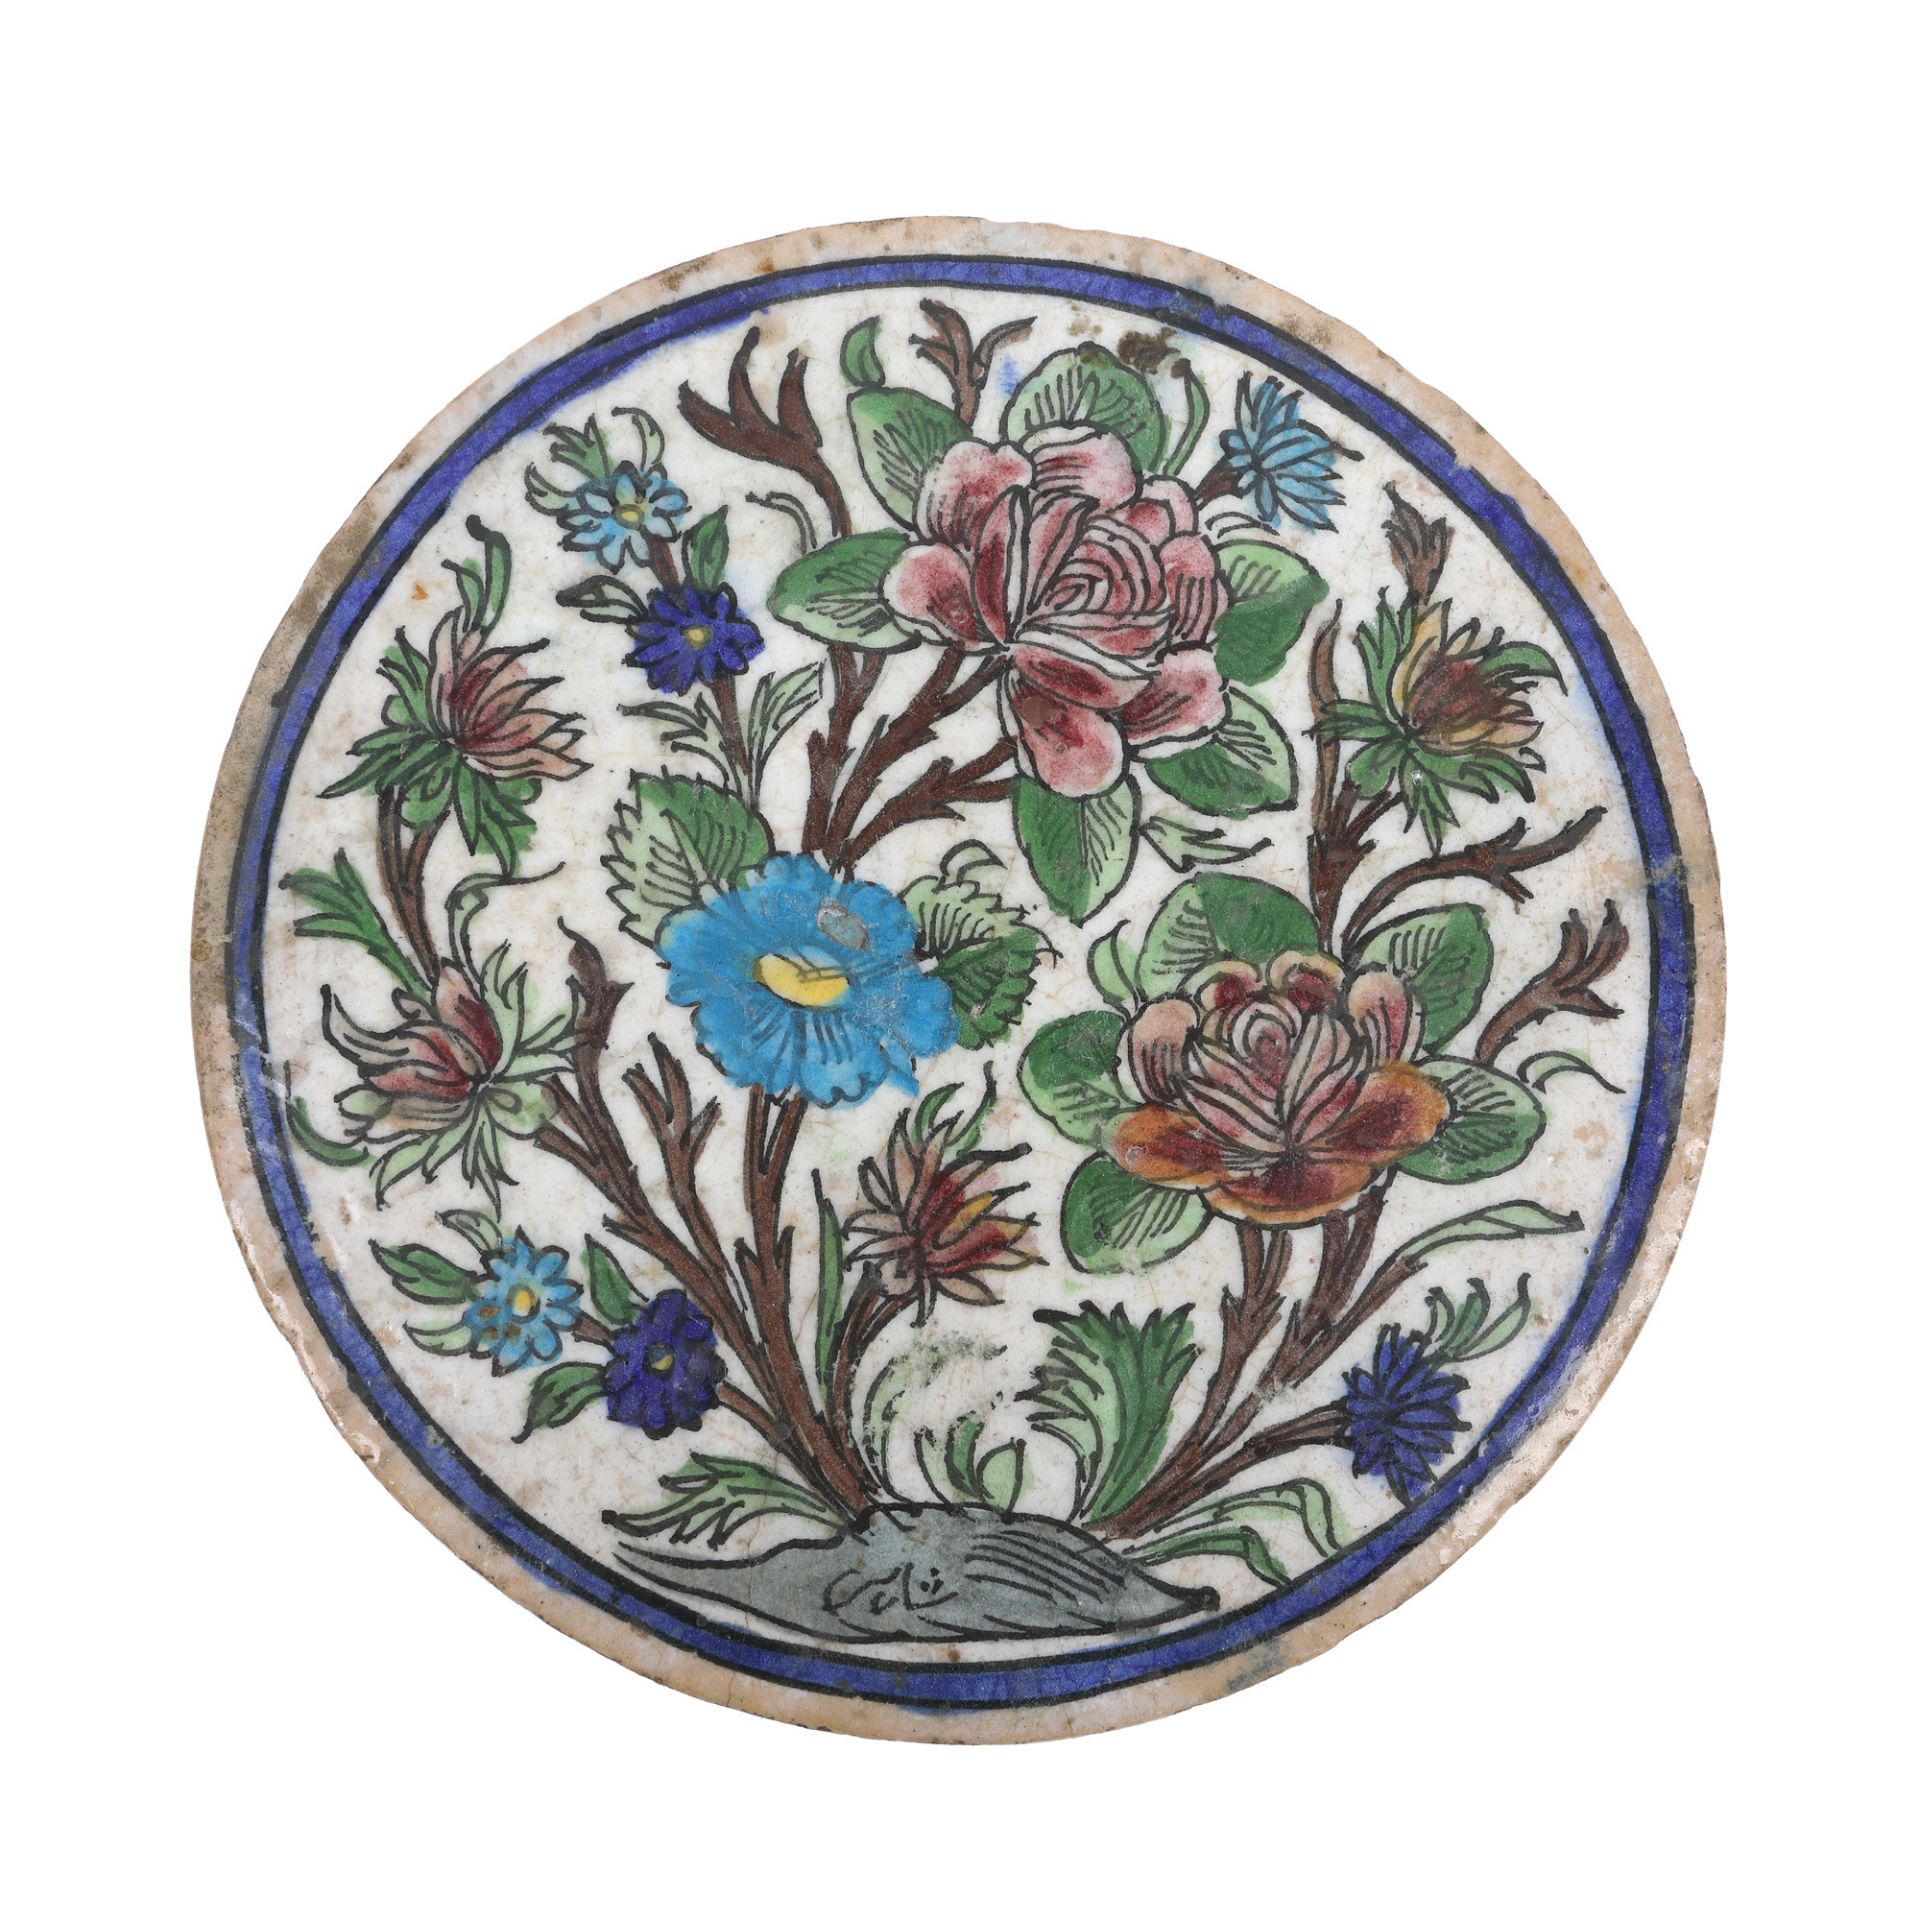 Terracotta plate/tile, decorated with vegetal and floral motifs, Kubachi manufacture, Iran, 17th-18t